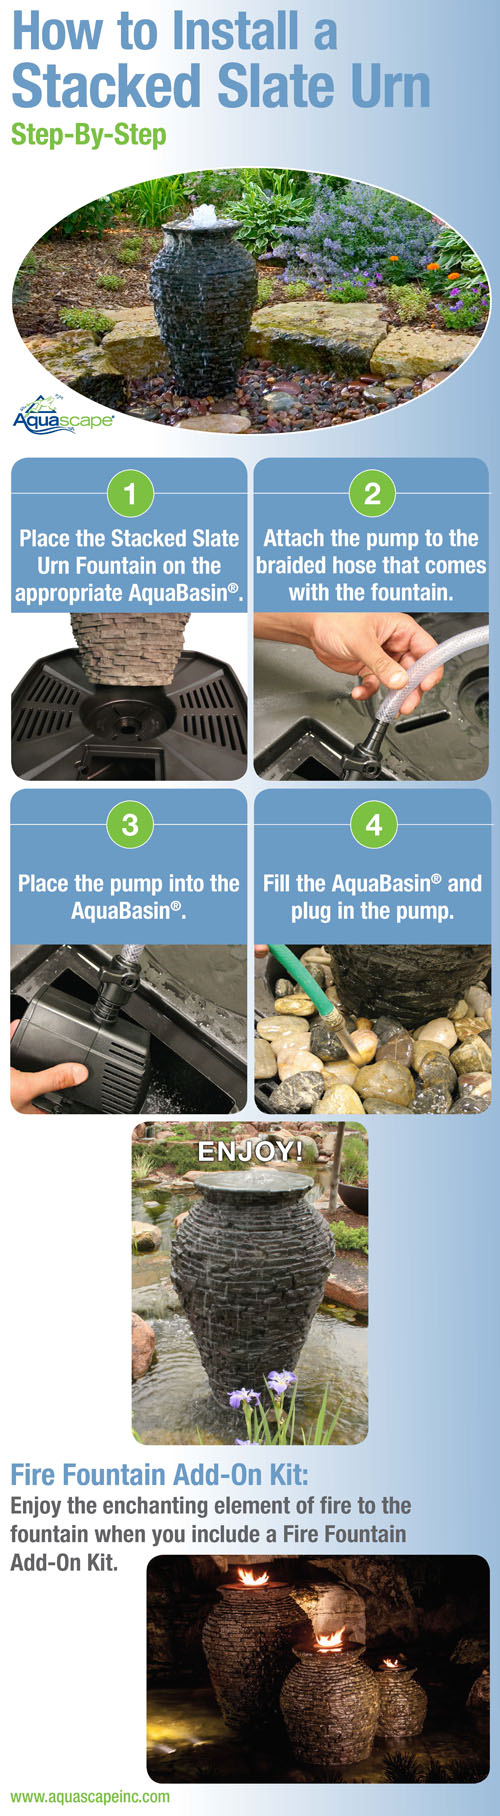 How to Install an Aquascape Fountain